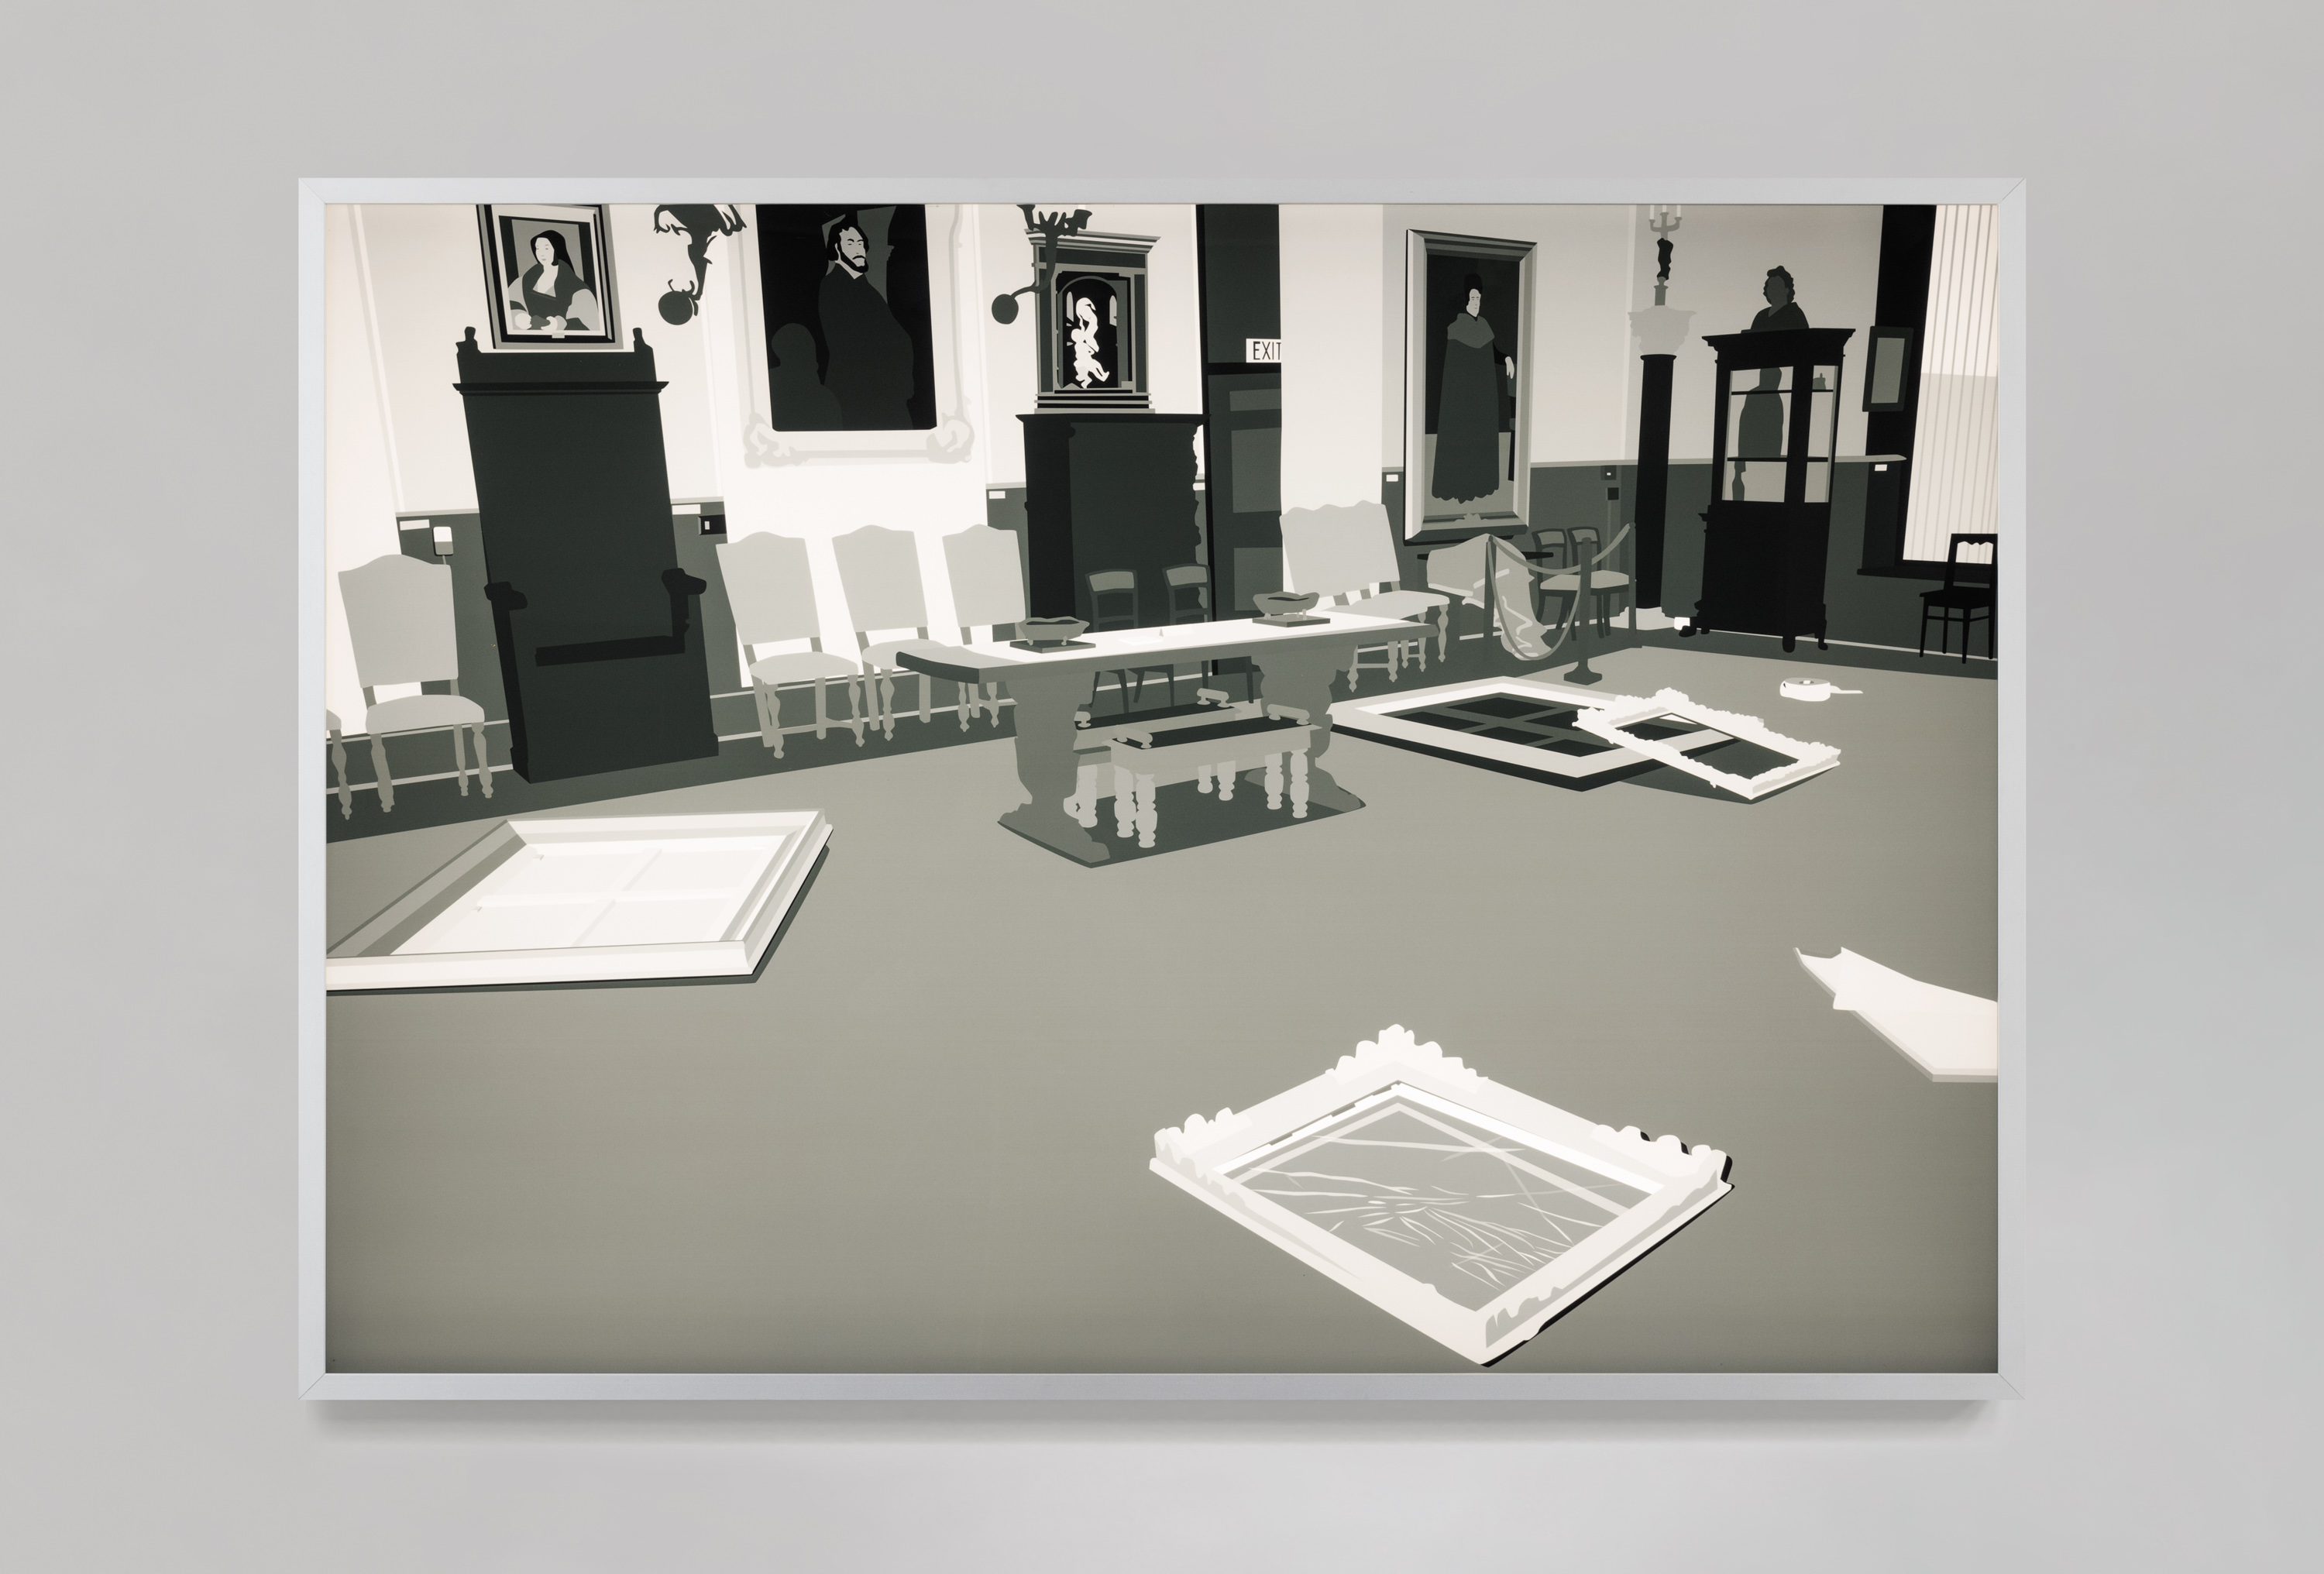 Color image of a black and white transparency on a light box depicting the aftermath of an art heist with empty and destroyed frames on floor of gallery